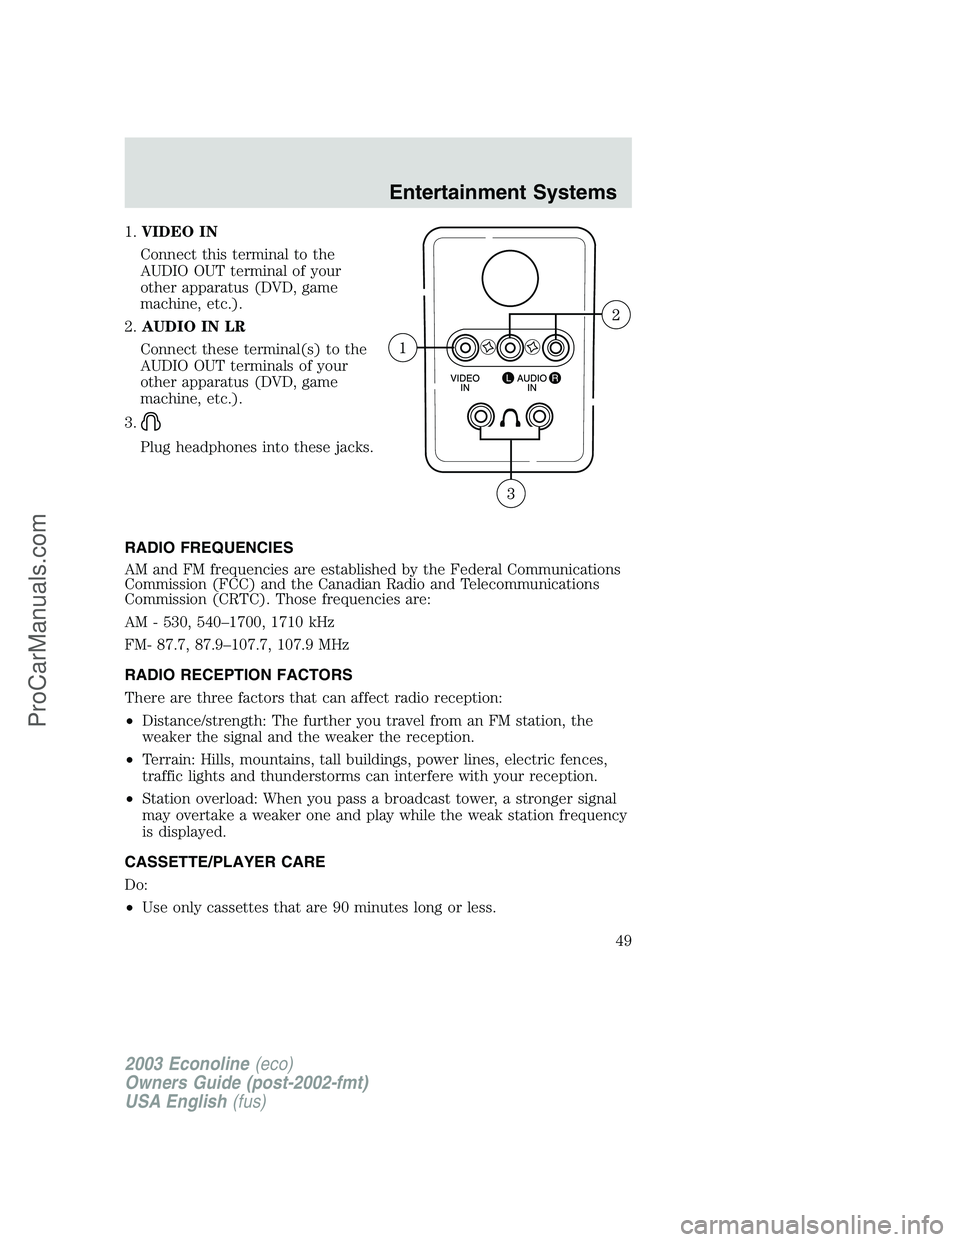 FORD E-450 2003 Service Manual 1.VIDEO IN
Connect this terminal to the
AUDIO OUT terminal of your
other apparatus (DVD, game
machine, etc.).
2.AUDIO IN LR
Connect these terminal(s) to the
AUDIO OUT terminals of your
other apparatus